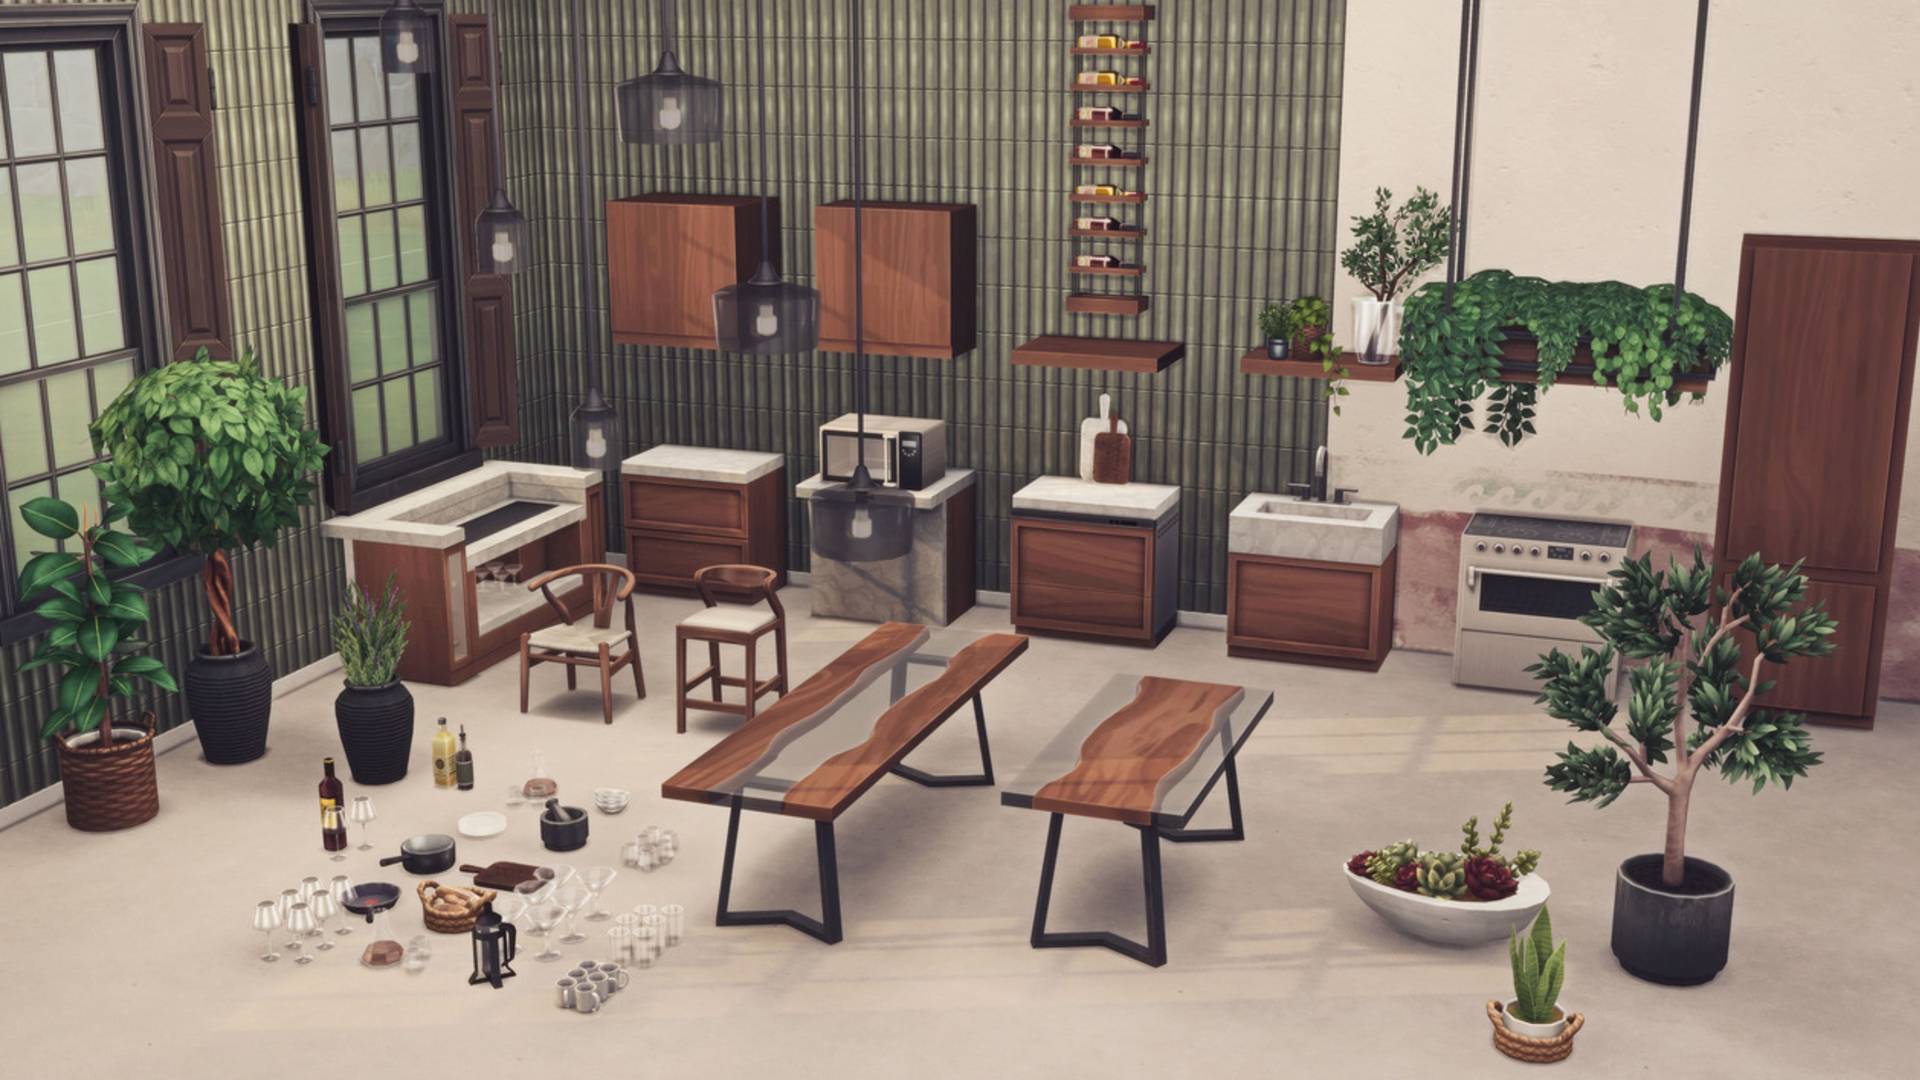 Sims 4 CC: A set of themed custom kitchen items for the home, including wine glasses, bar counters, objects and plants.